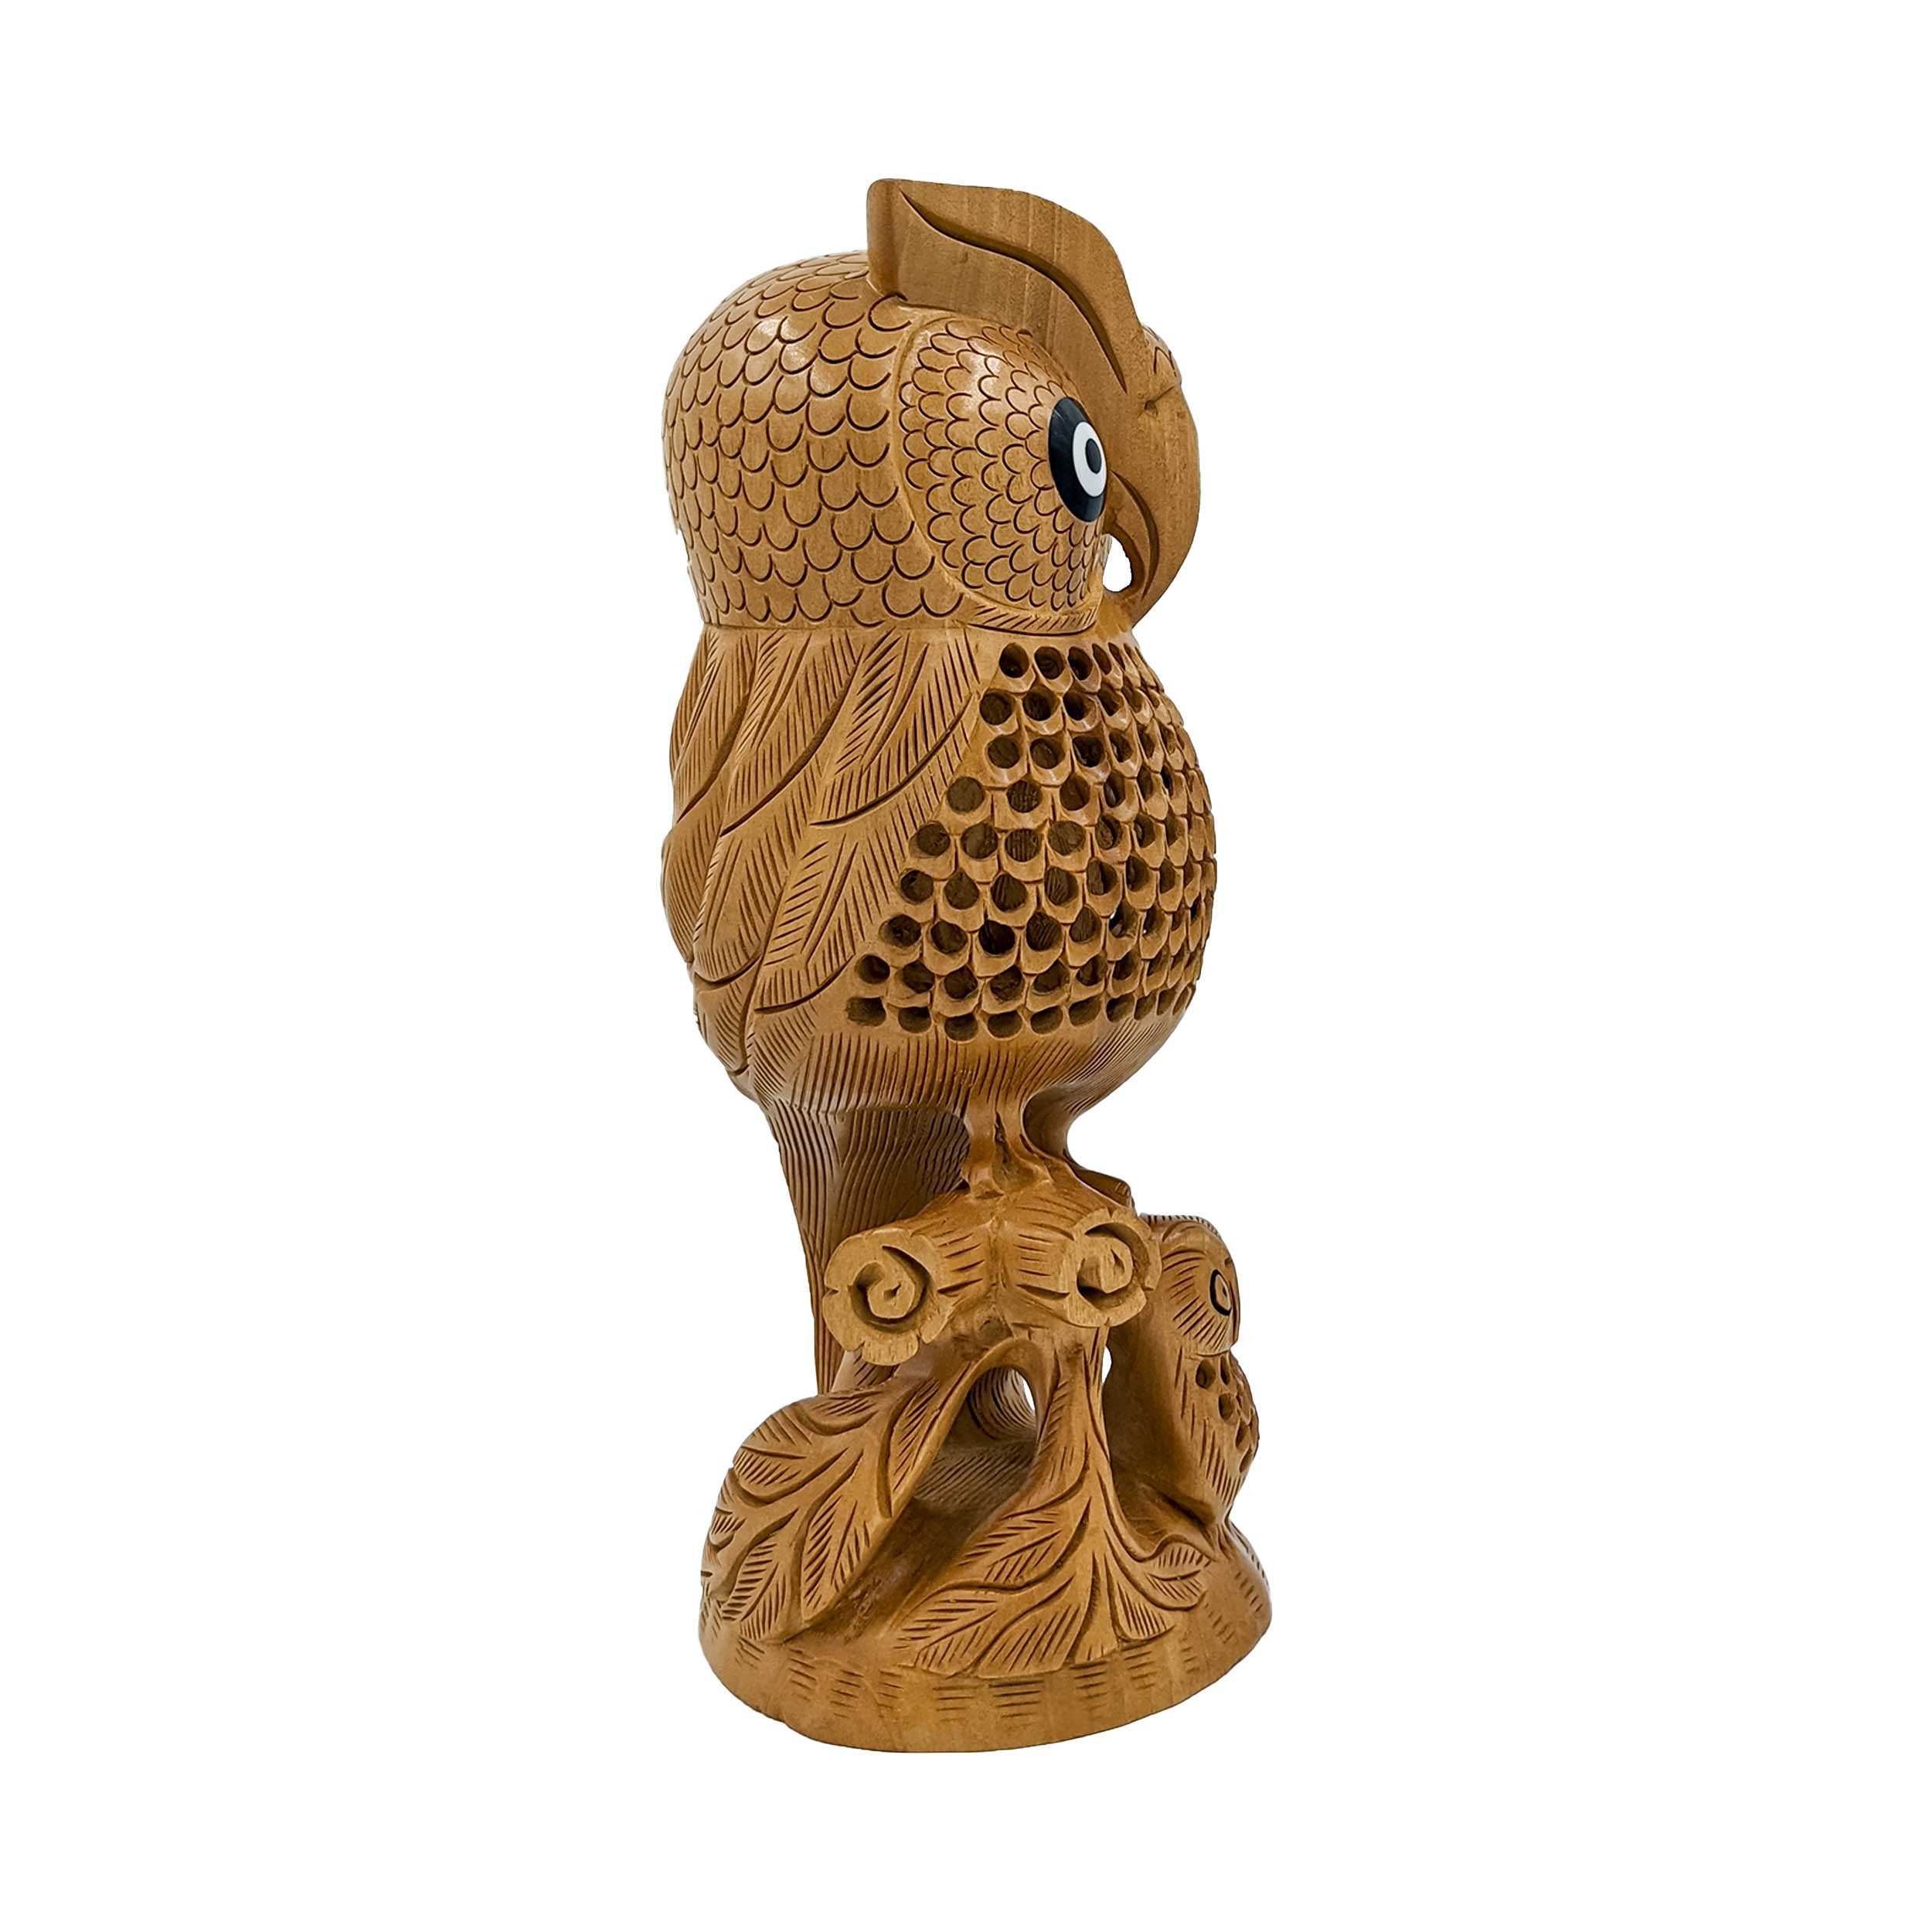 Wooden Handmade Carved Owl Statue